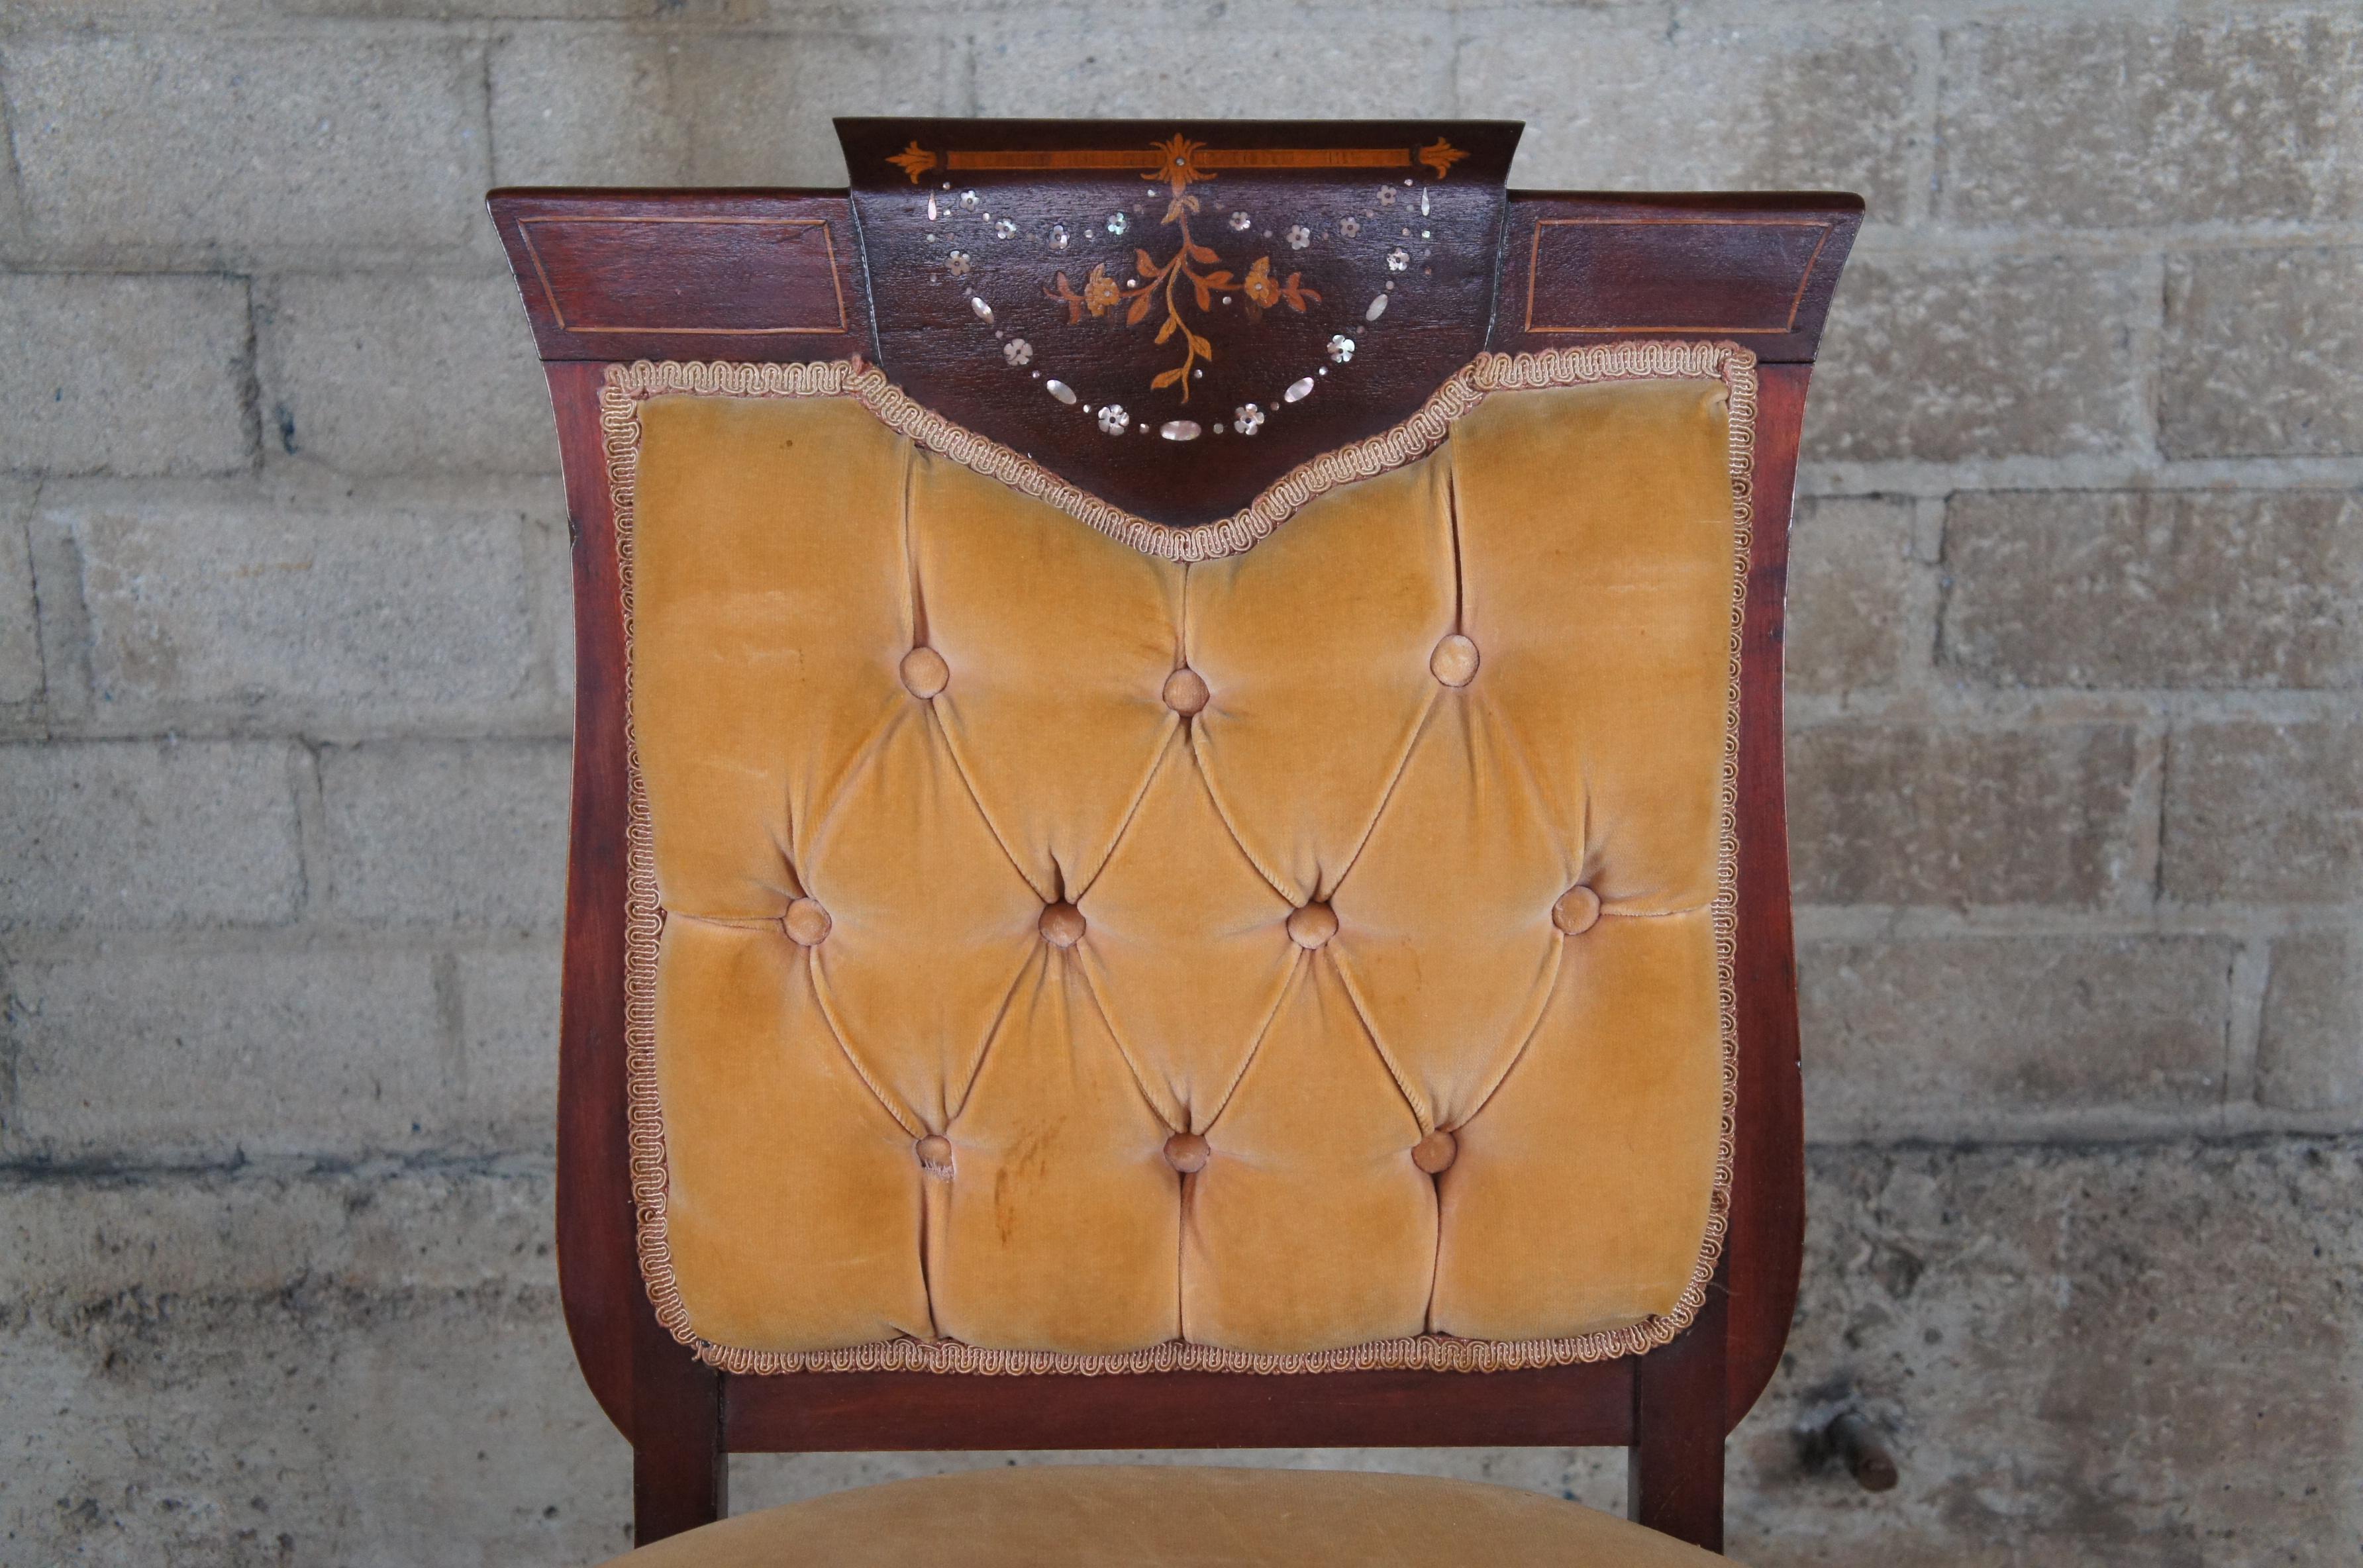 Upholstery 2 Antique Edwardian Mahogany Chairs Marquetry Mother of Pearl Tufted Shield Back